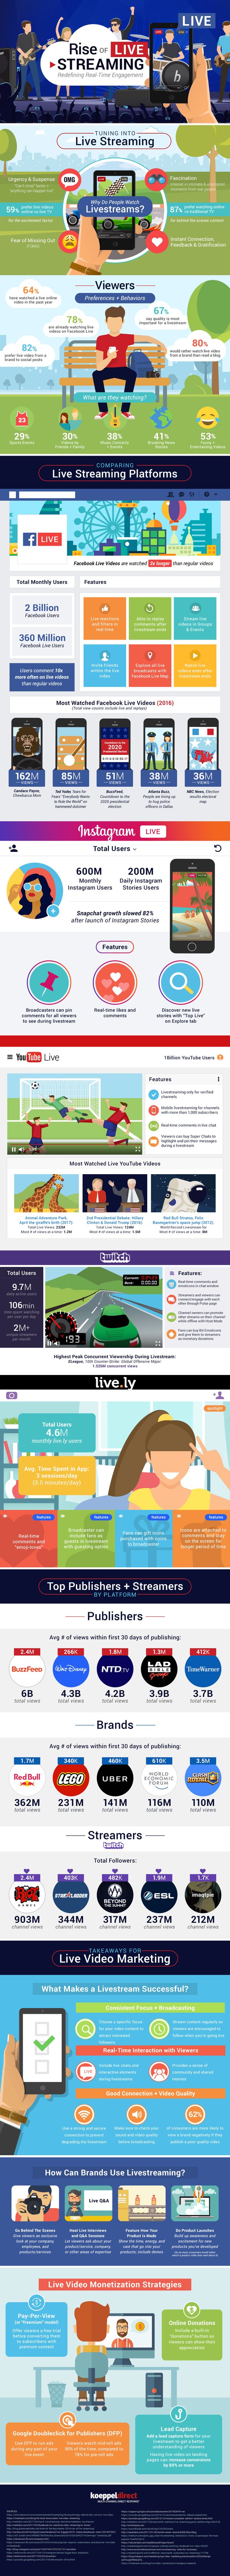 Live Streaming Infographic